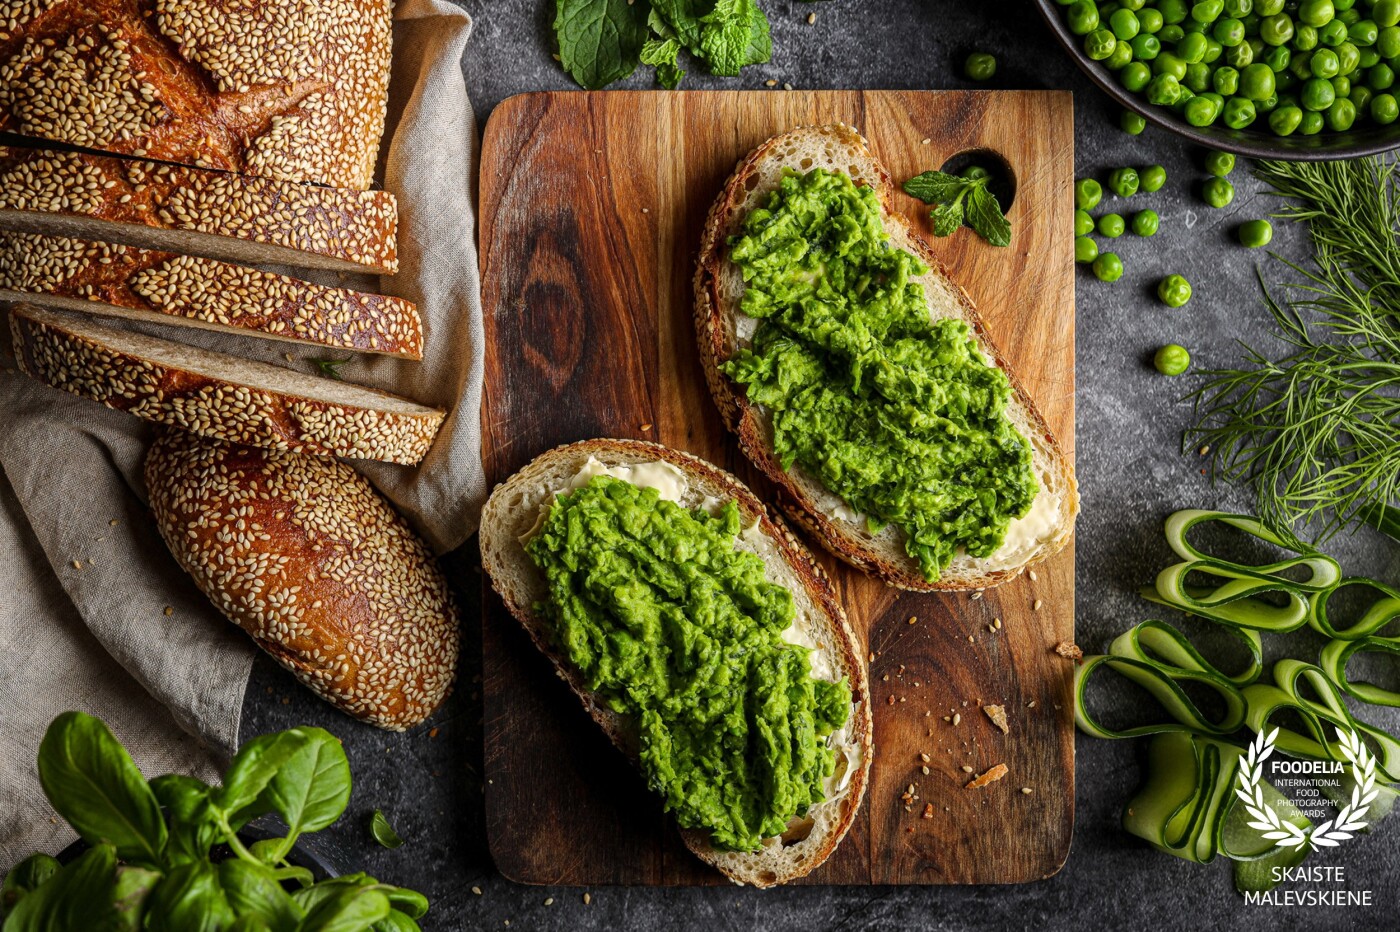 This picture is about textures and shapes. Simple and yet beautiful loaf of bread and greens: peas, basil and mint. Simple is beautiful.